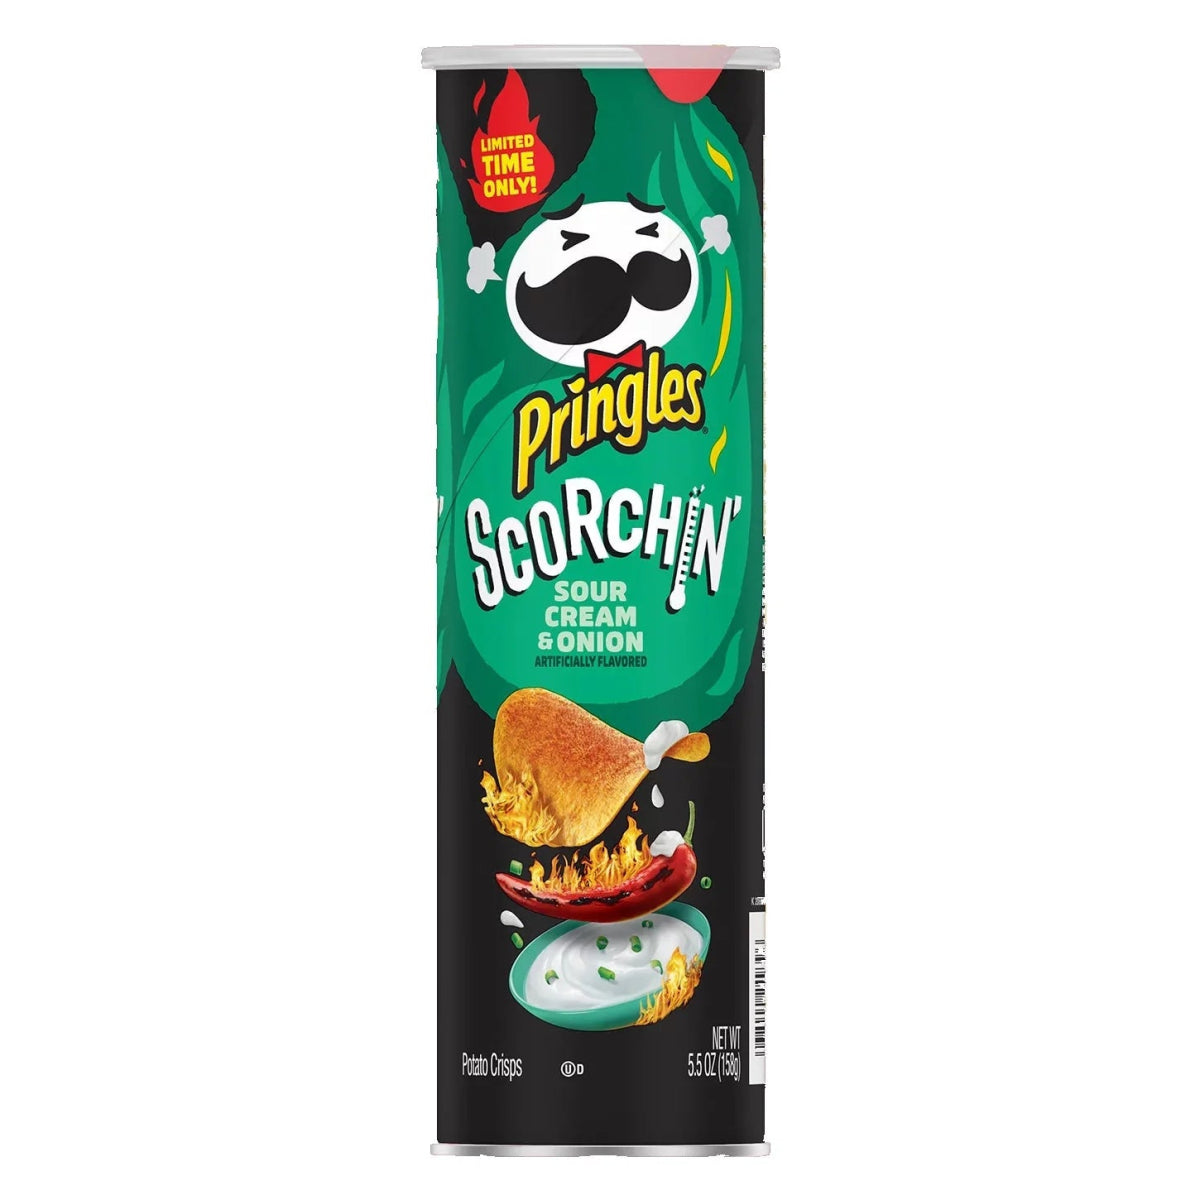 Pringles Scorchin' Sour Cream and Onion 158g (Damaged Packaging) - Candy Mail UK